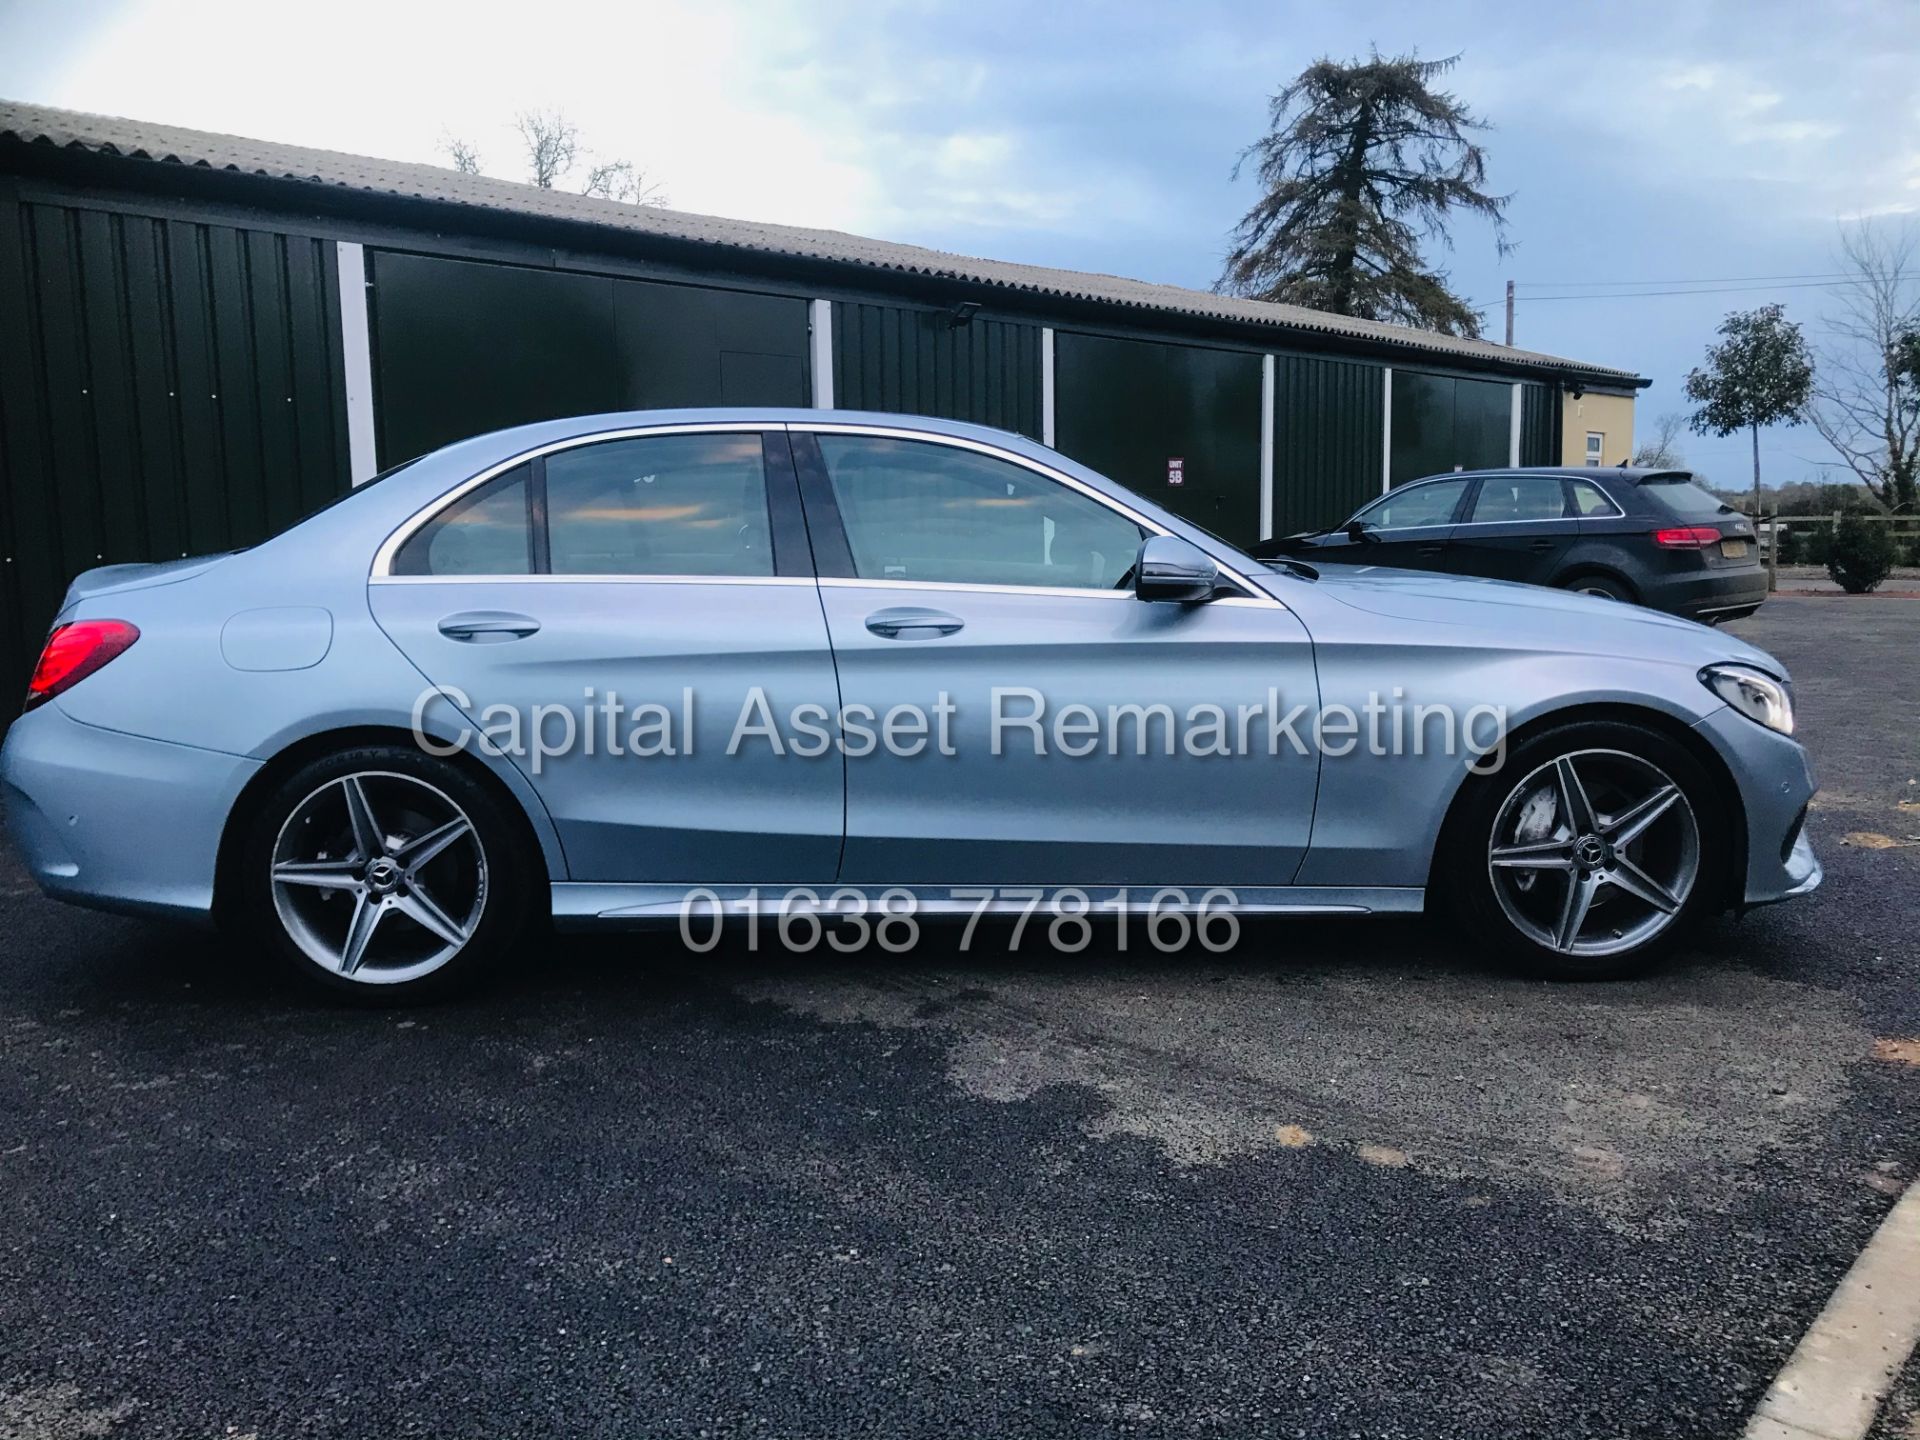 (ON SALE) MERCEDES C220d "AMG LINE" AUTOMATIC (18 REG) 1 OWNER - LEATHER - NAV - REAR CAMERA - Image 11 of 22